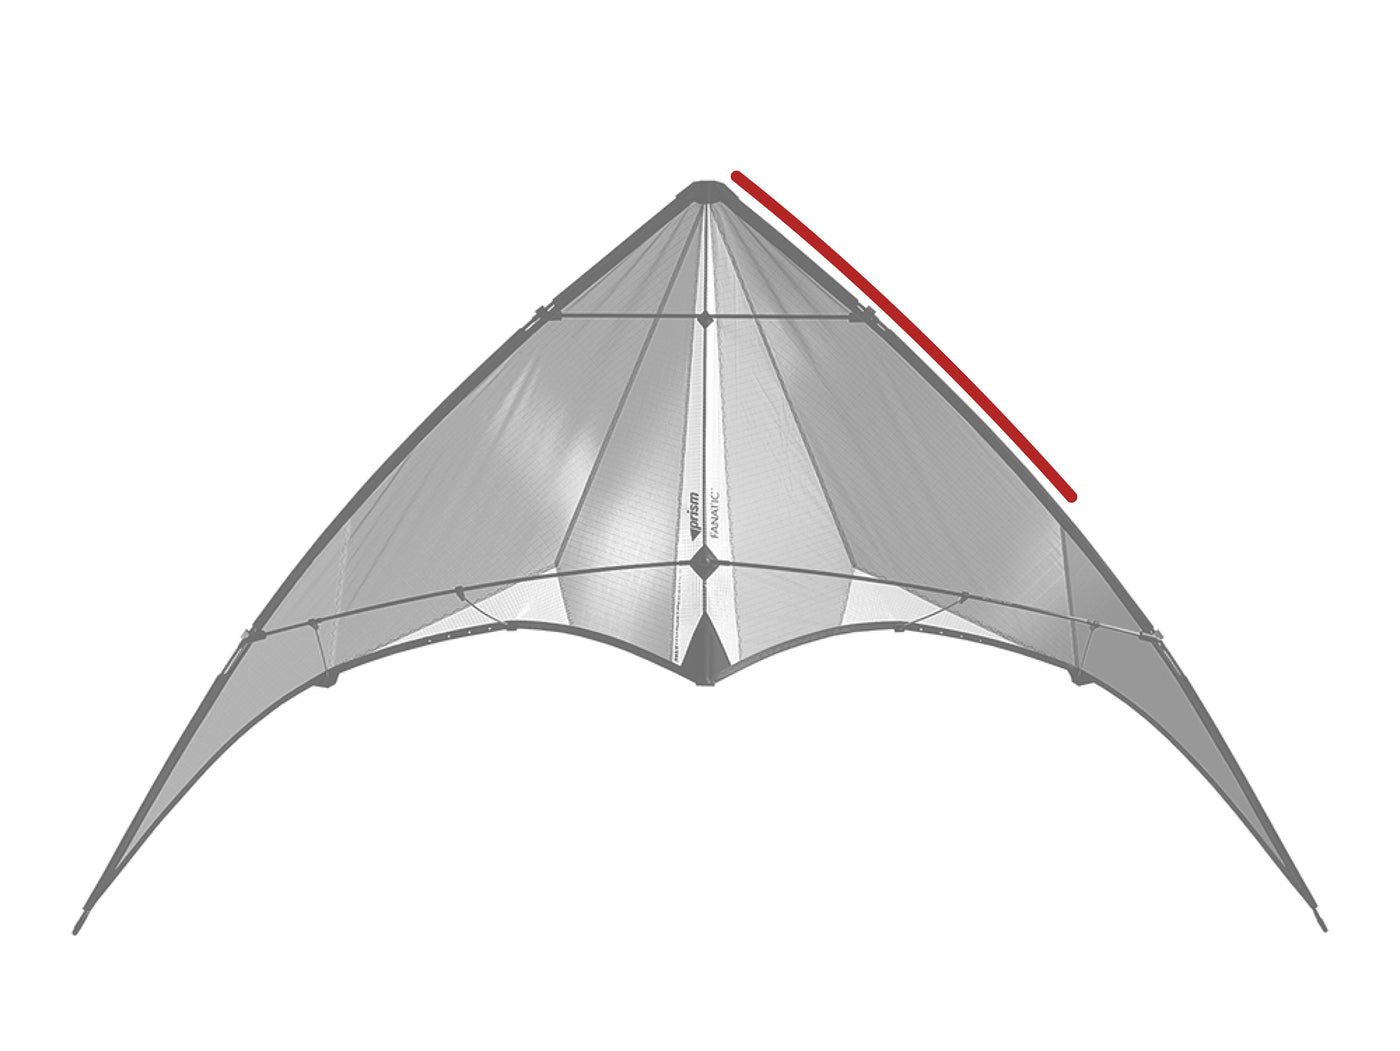 Diagram showing location of the Fanatic (1997) Upper Leading Edge on the kite.